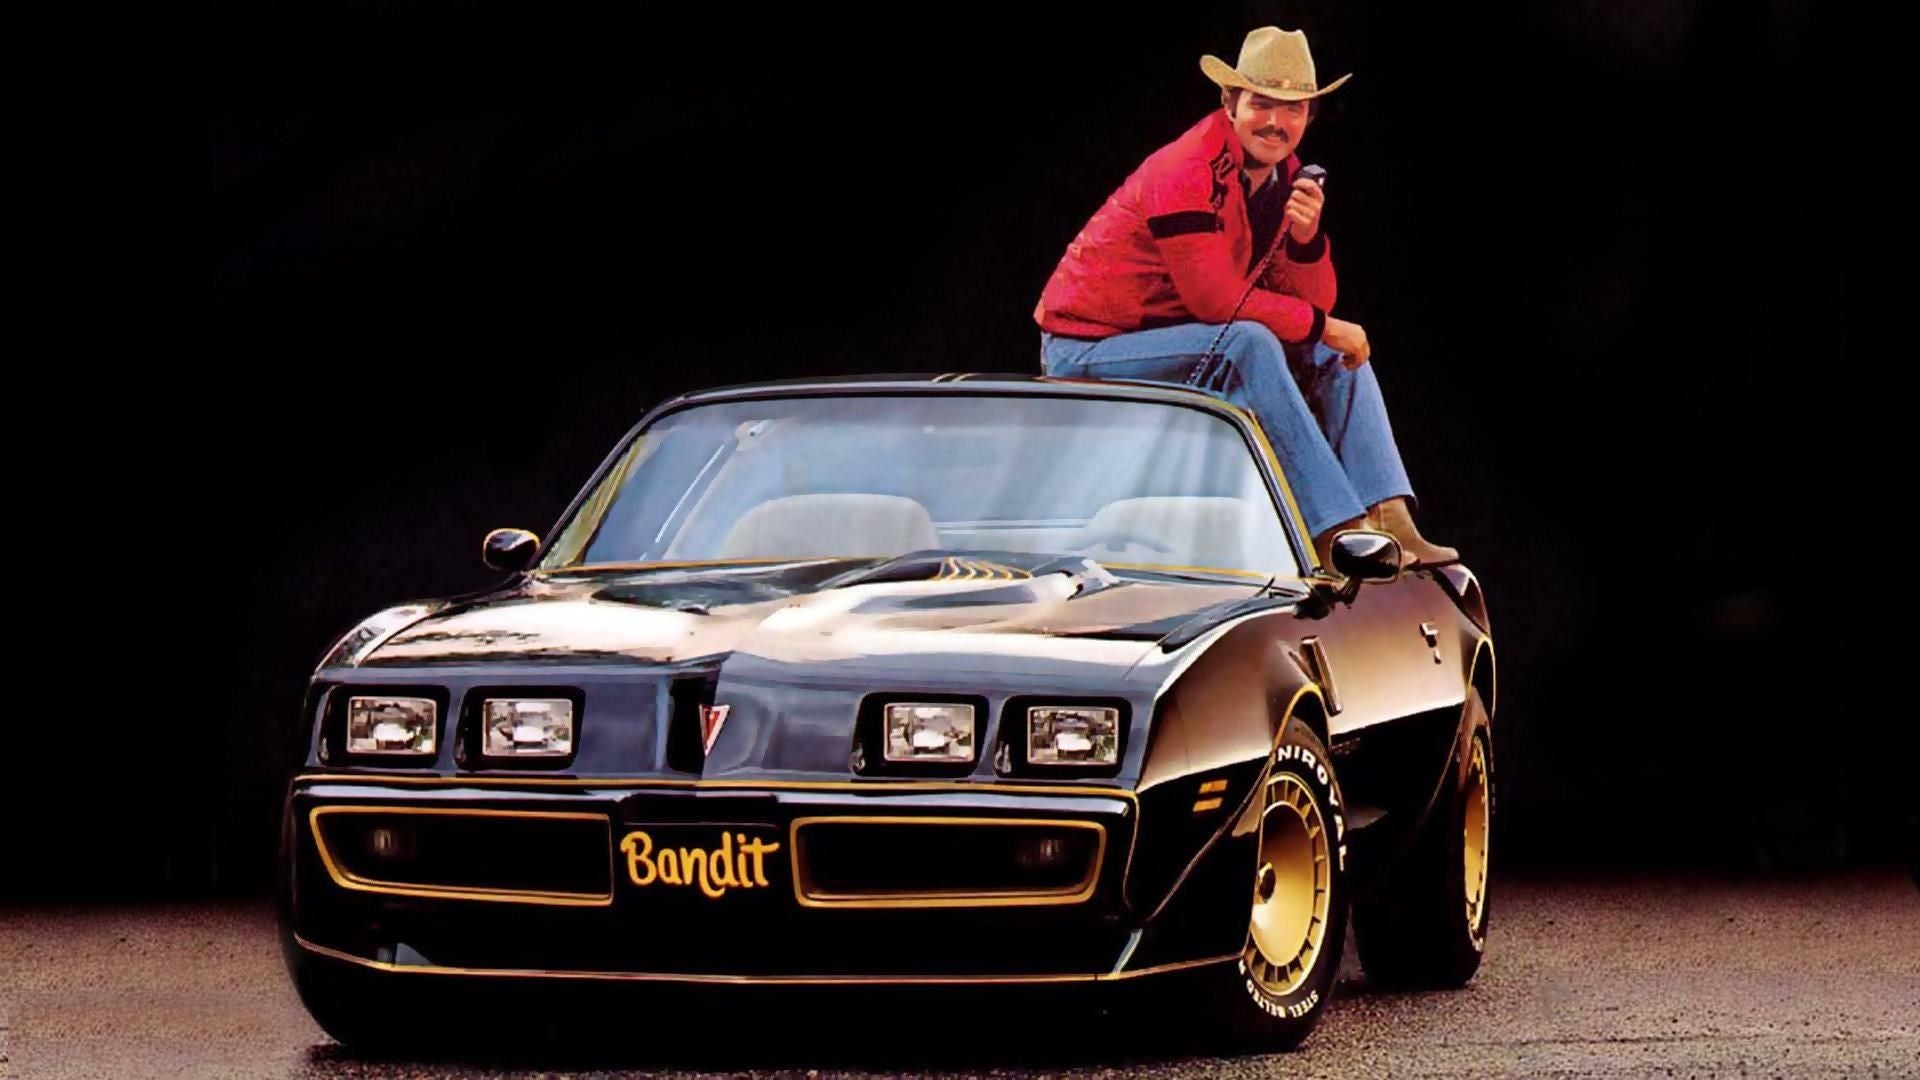 Smokey and the Bandit: The 7 Movie Outlaw Collection